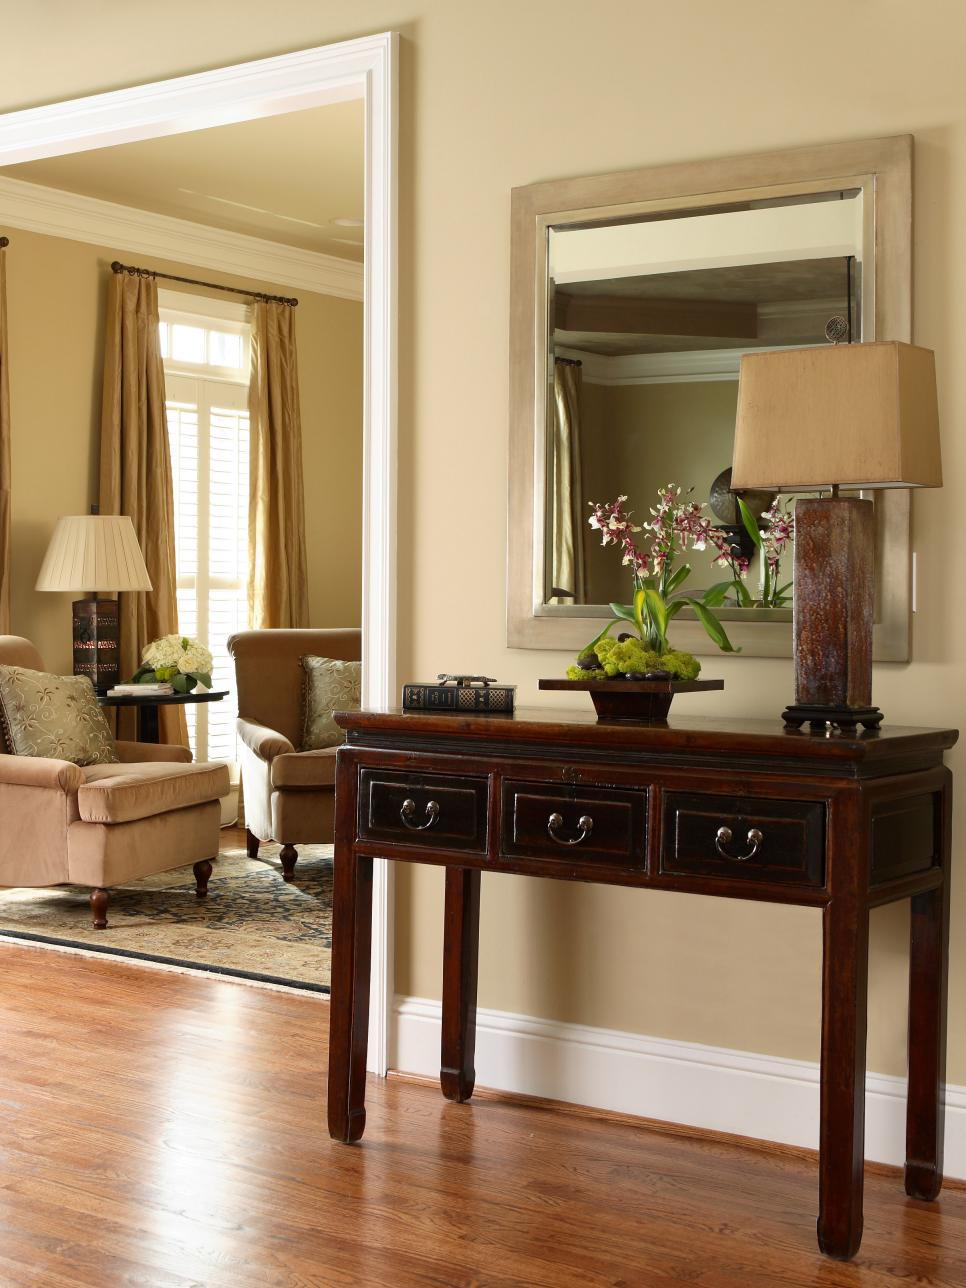 Classic Entryway With Traditional Table and Mirror